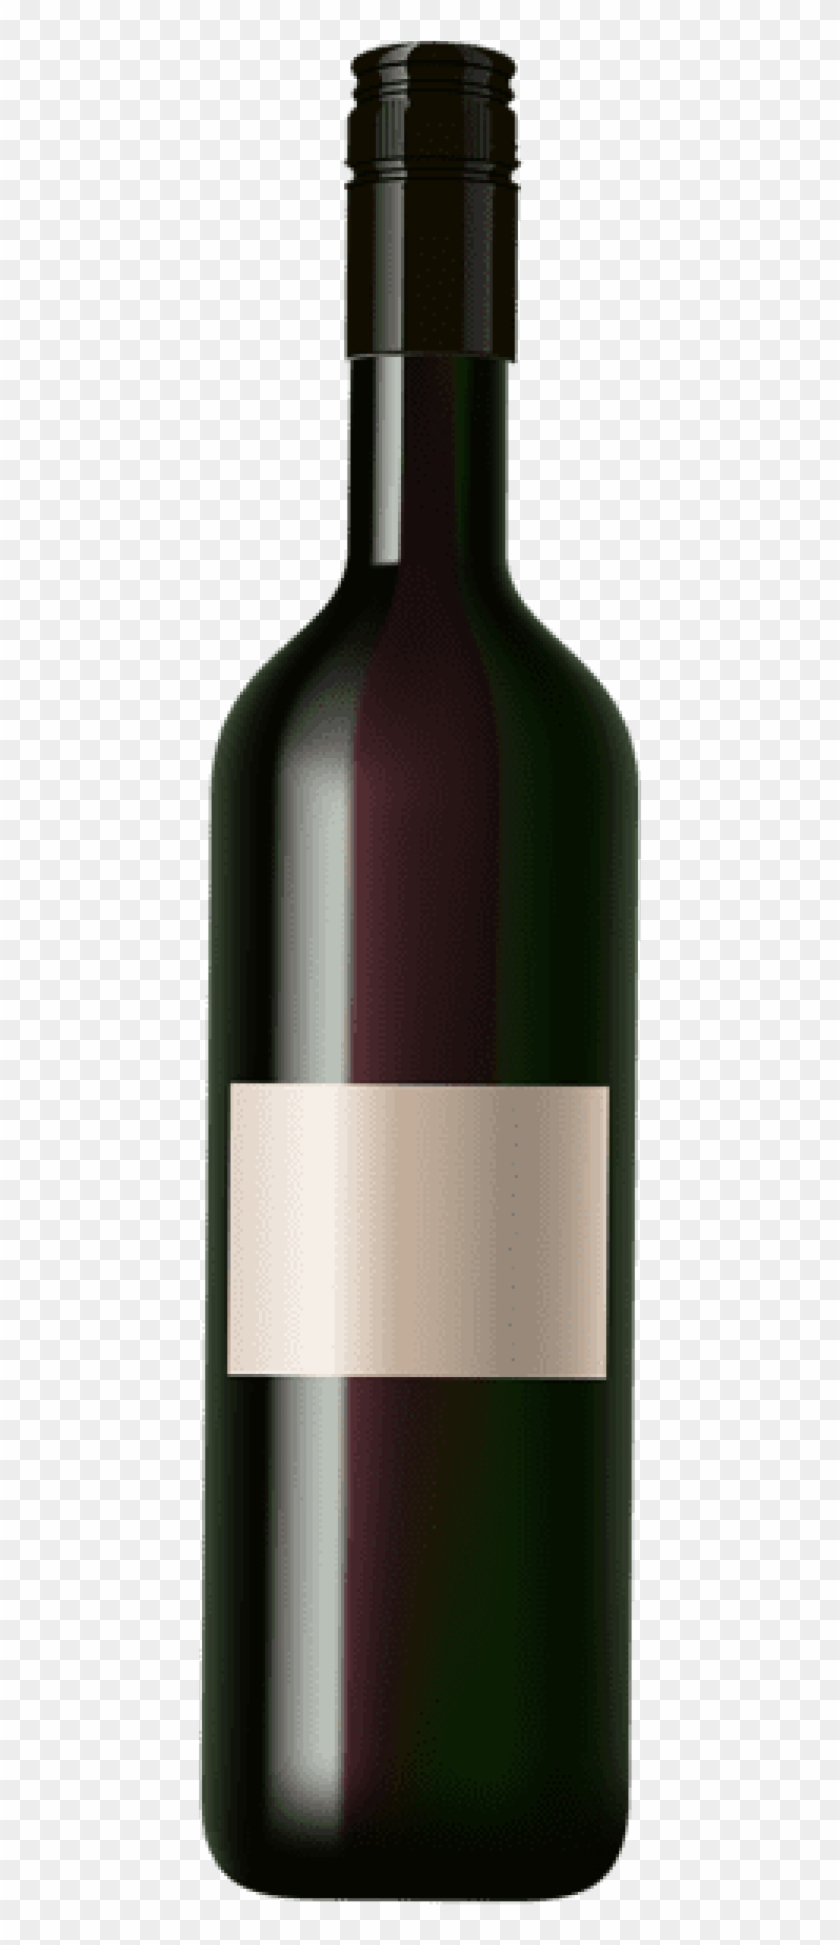 An image of a wine bottle